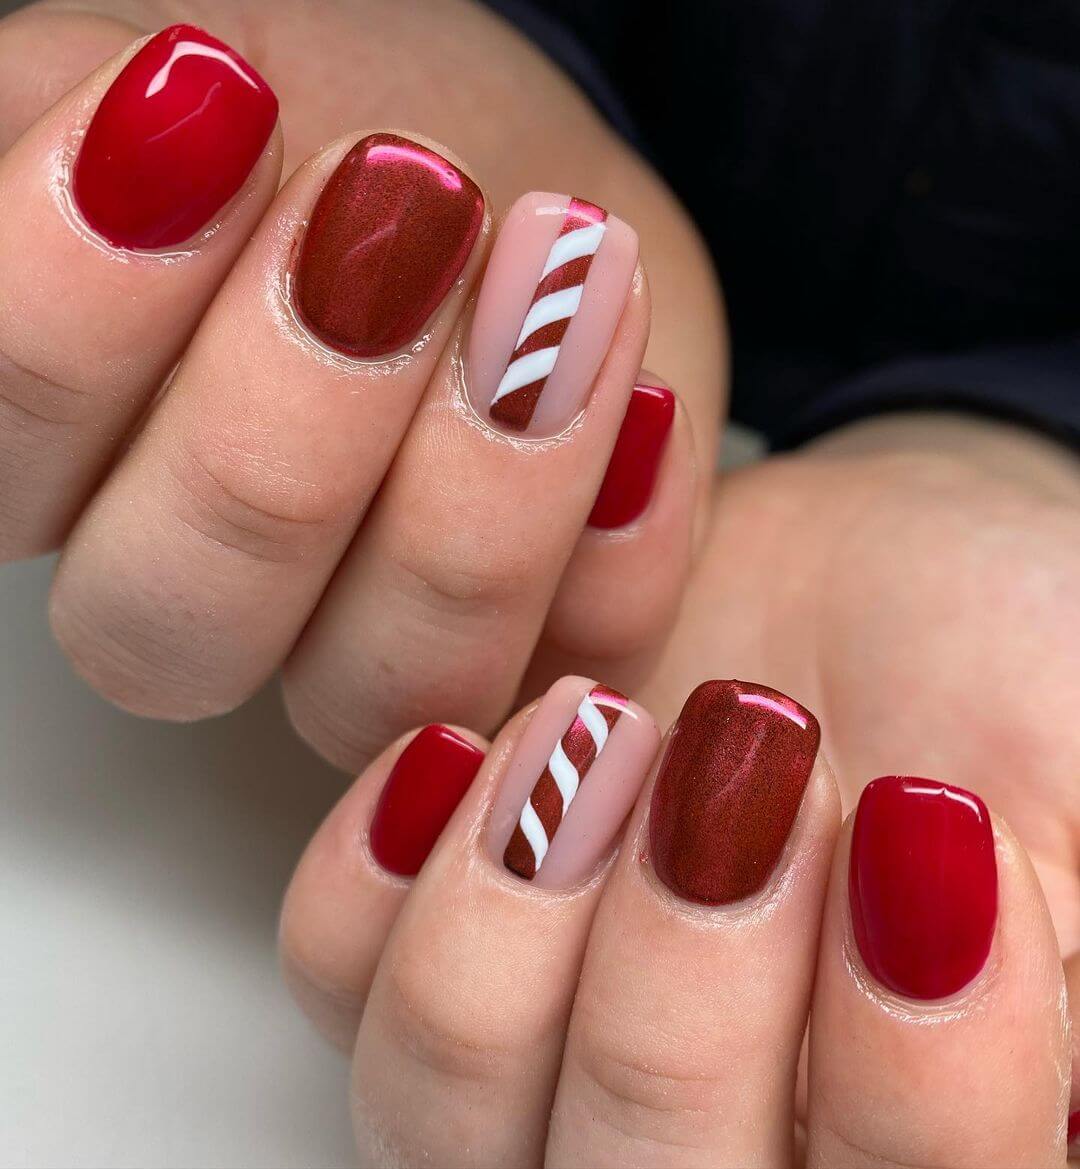 Christmas nail art designs The Sweet Candy Cane